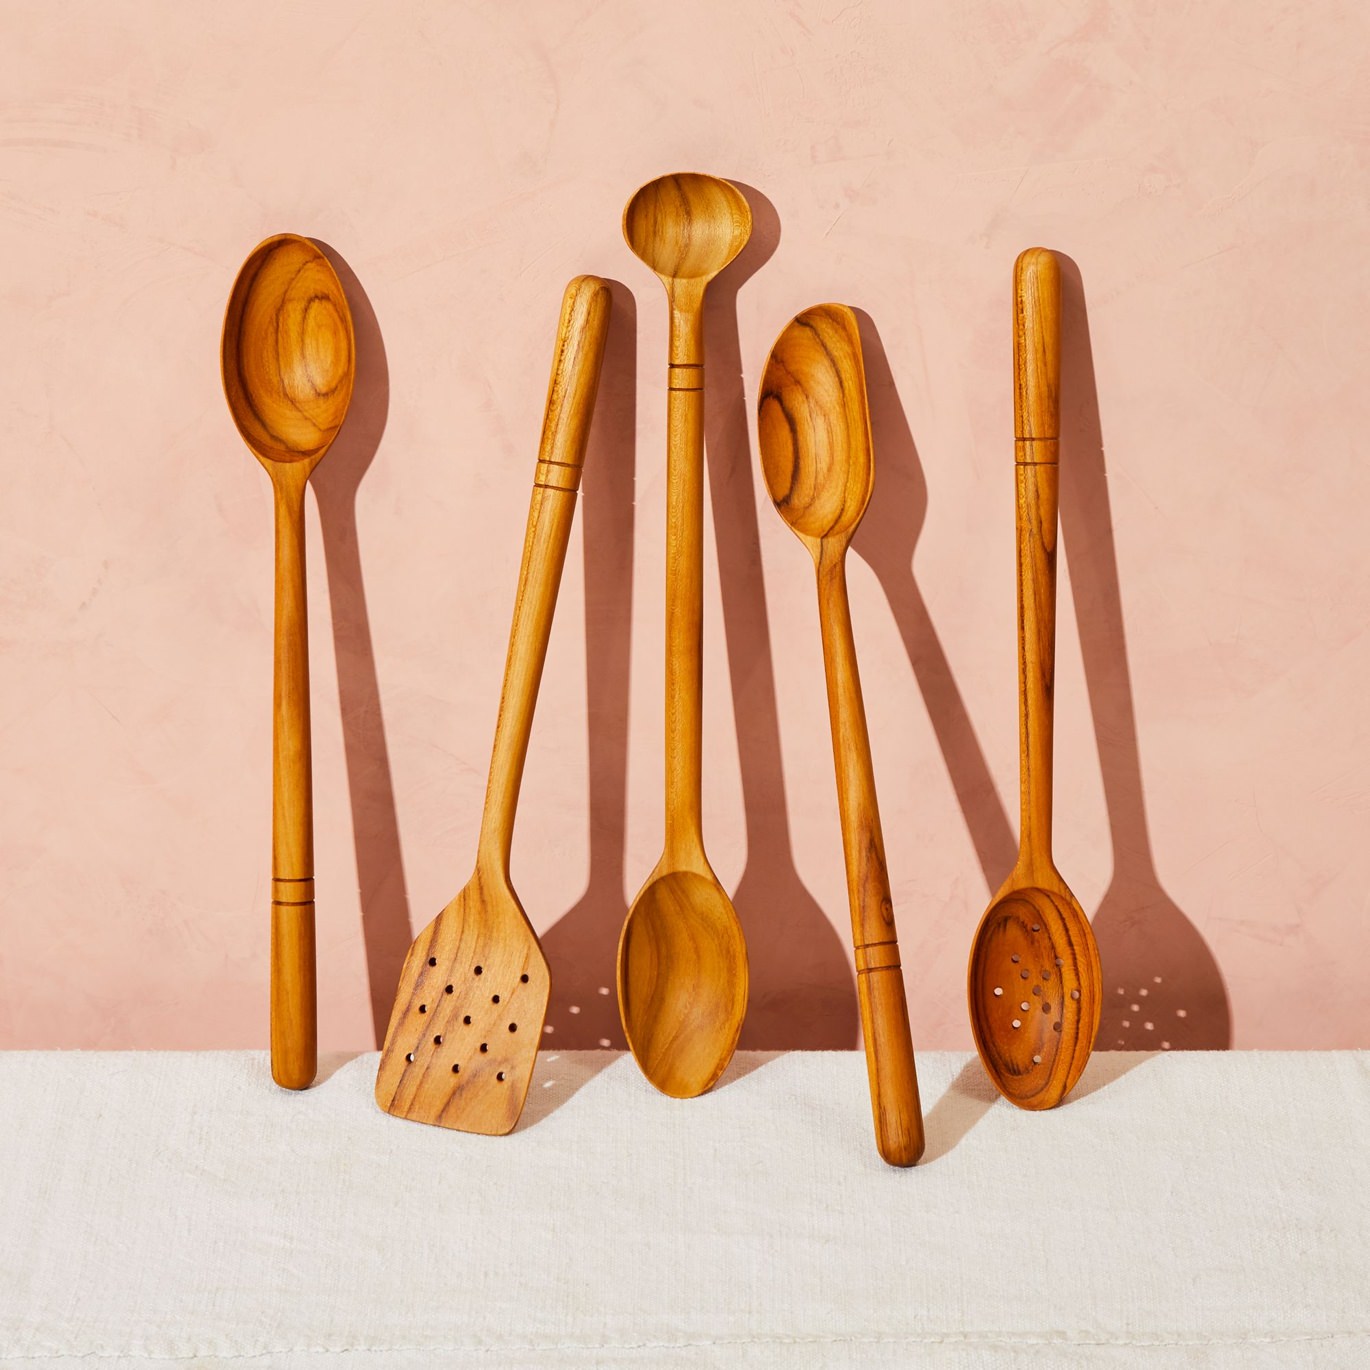 Five.Two Vintage-Inspired Wooden Spoons